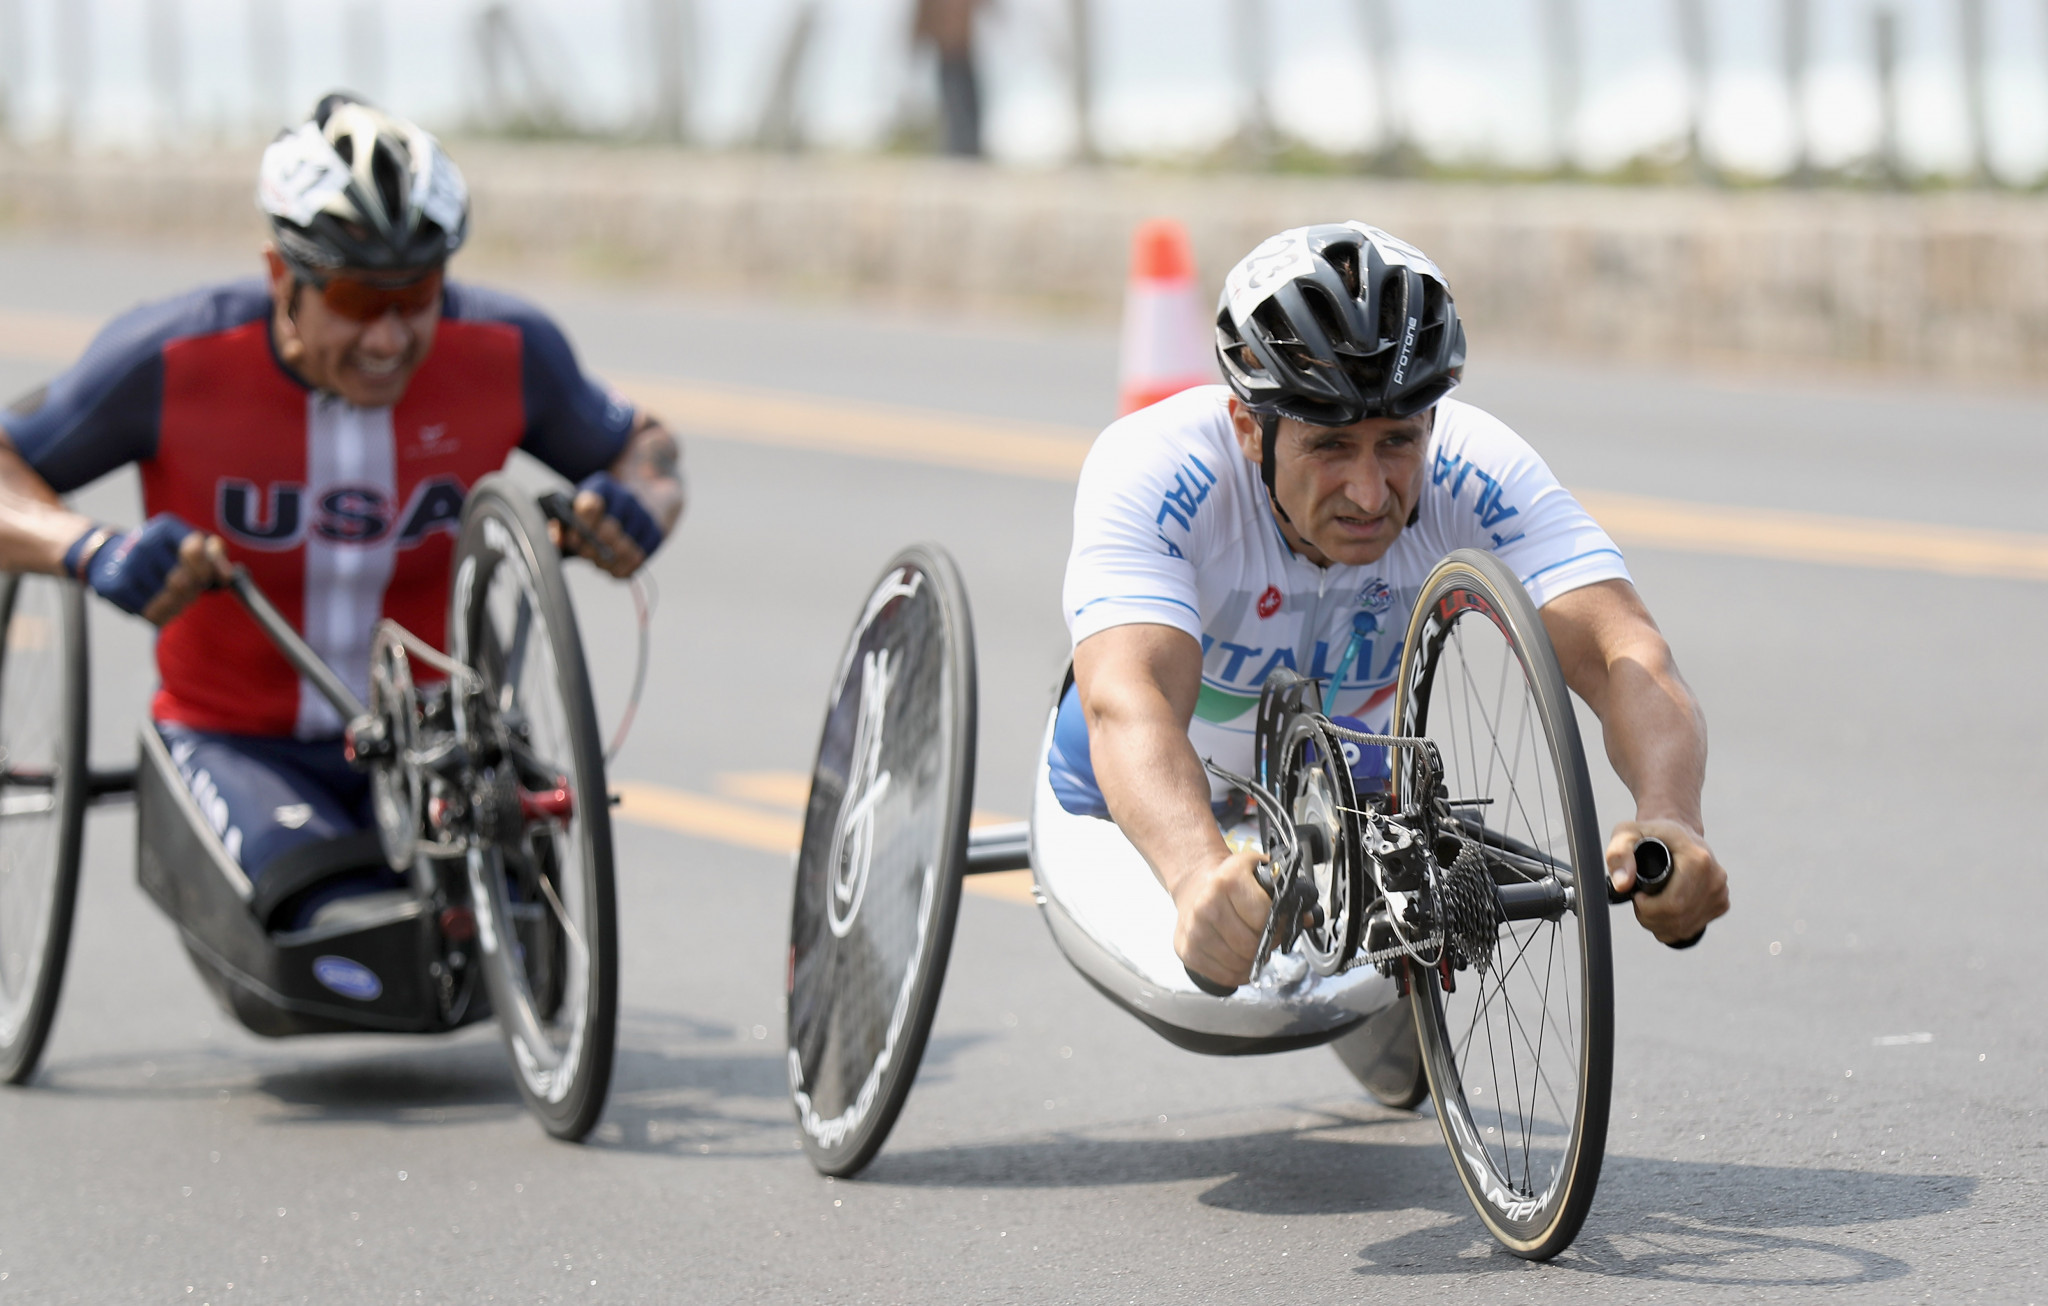 Alessandro Zanardi of Italy competes in the Men's Road Race H5 on day 8 of the Rio 2016 Paralympic Games ©Getty Images